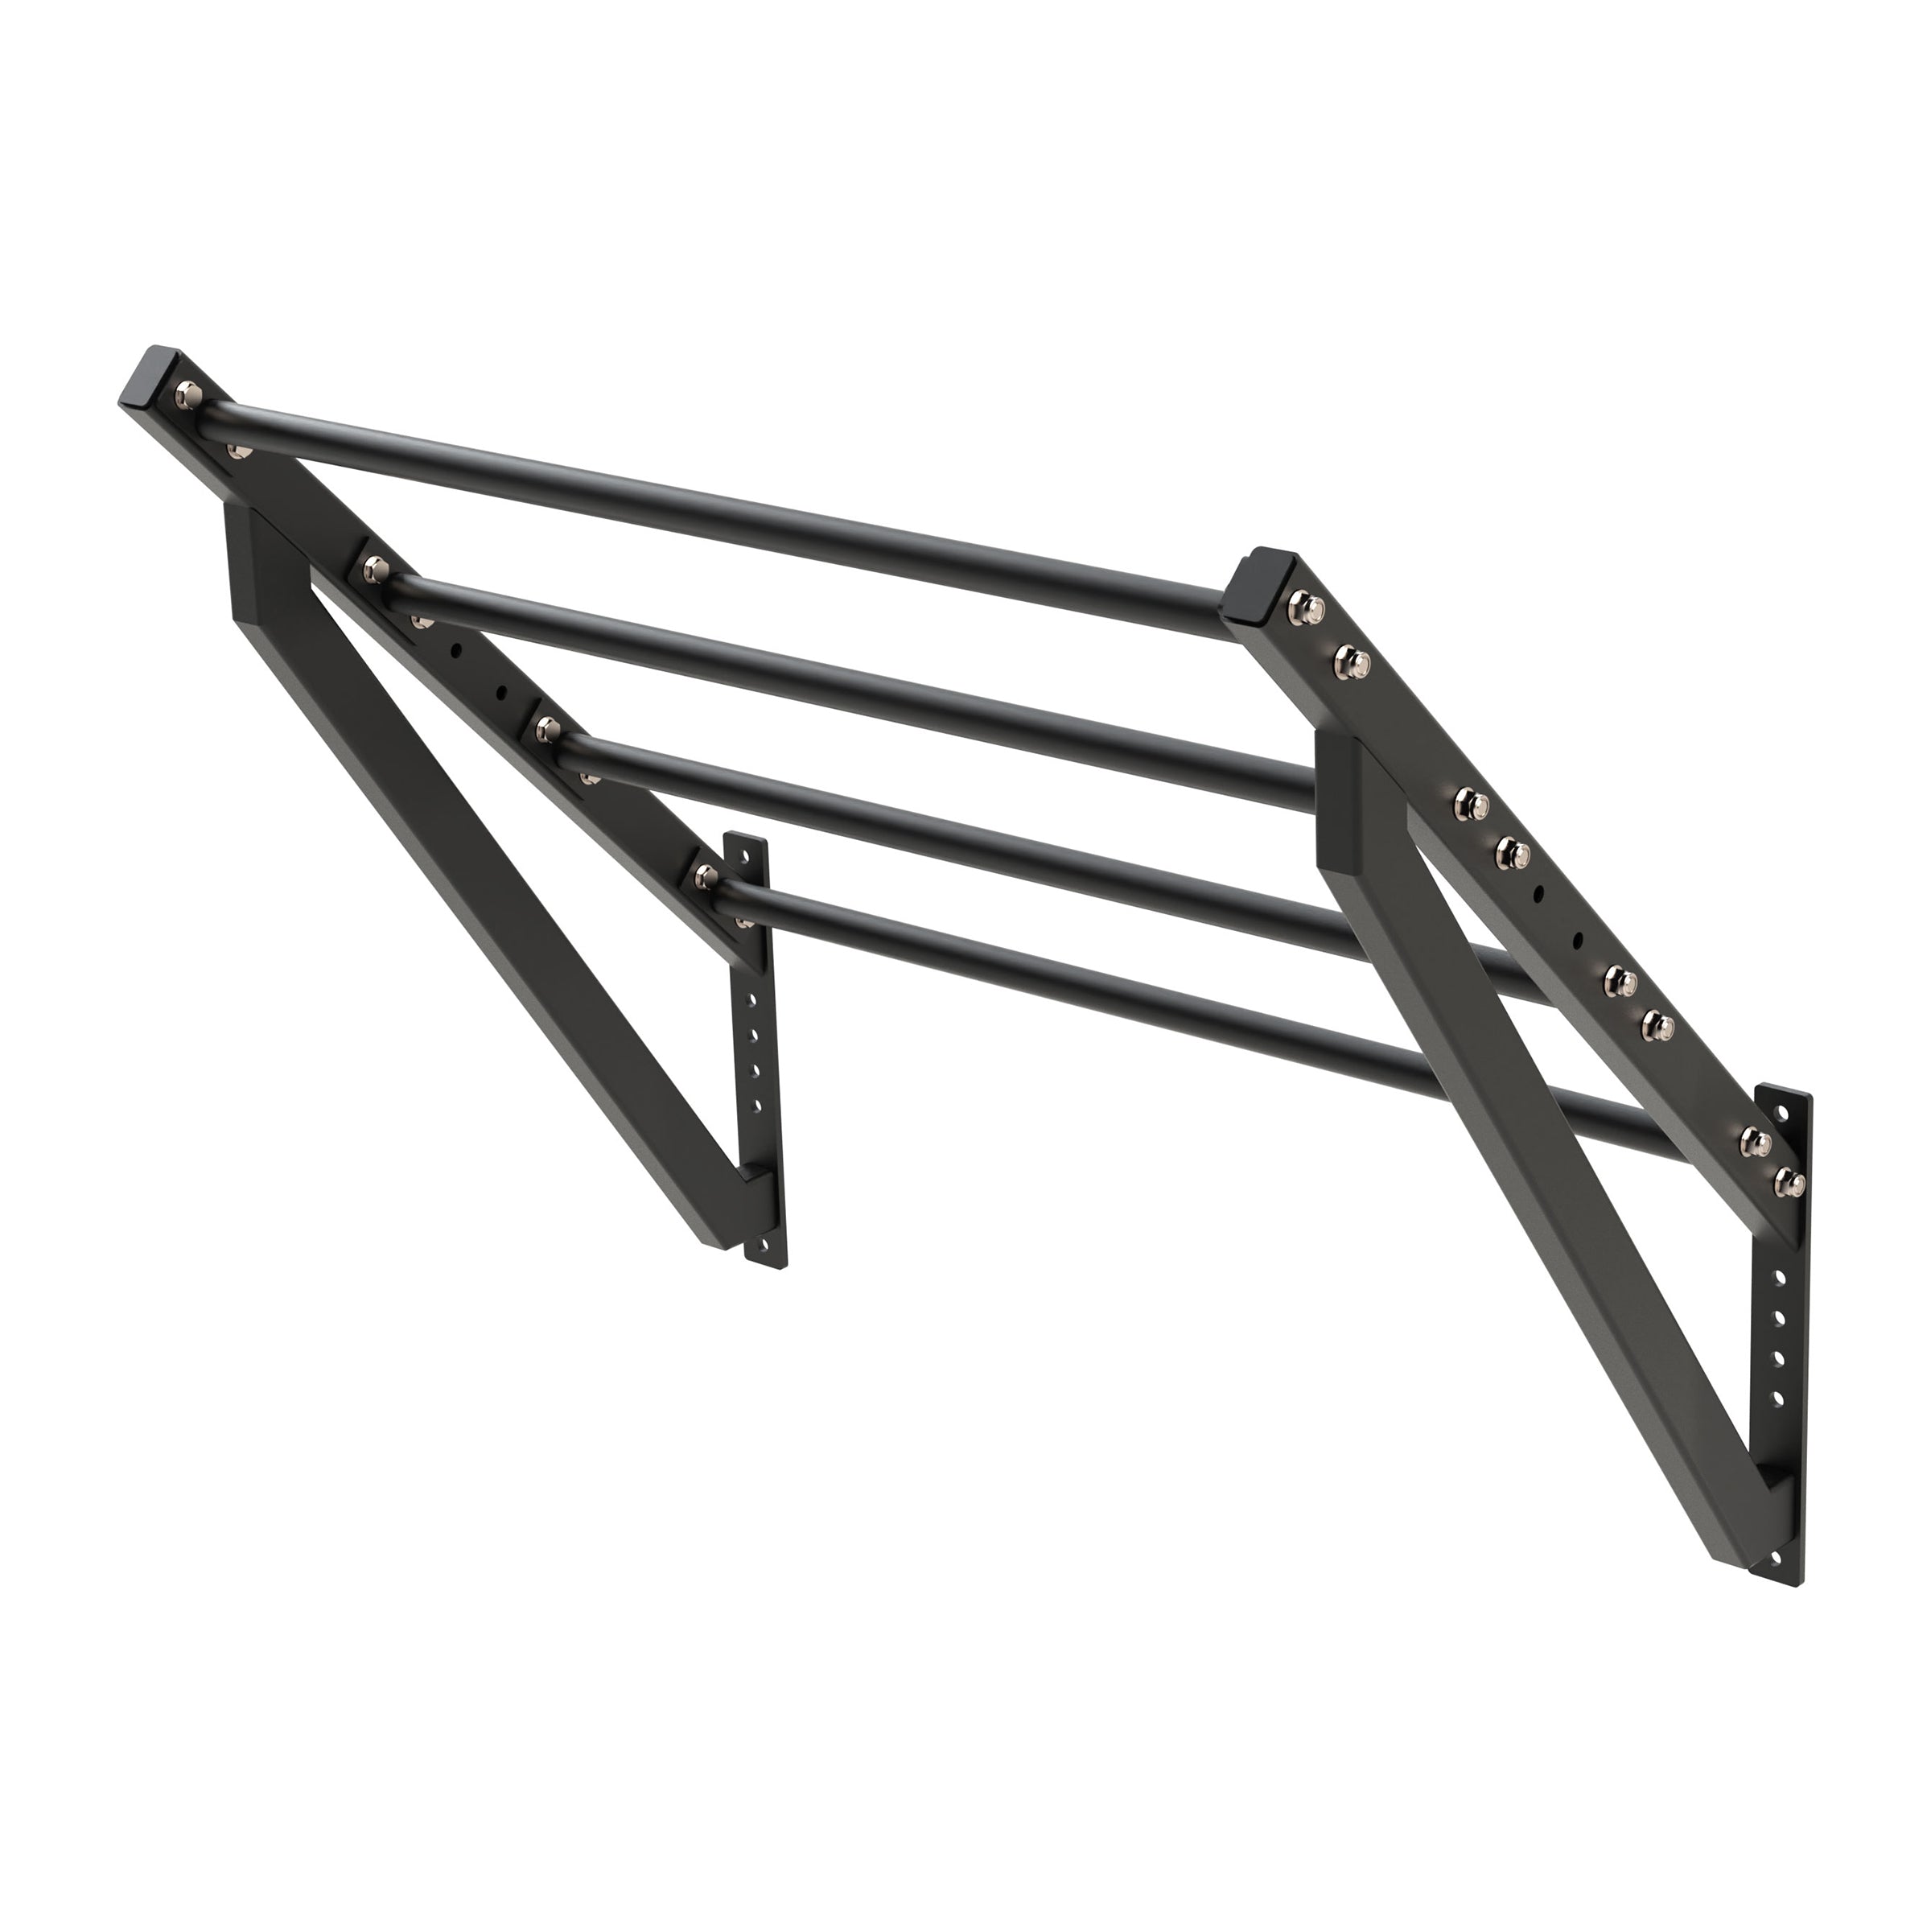 Bison Series - Wing Pull Up Bar - Wolverson Fitness